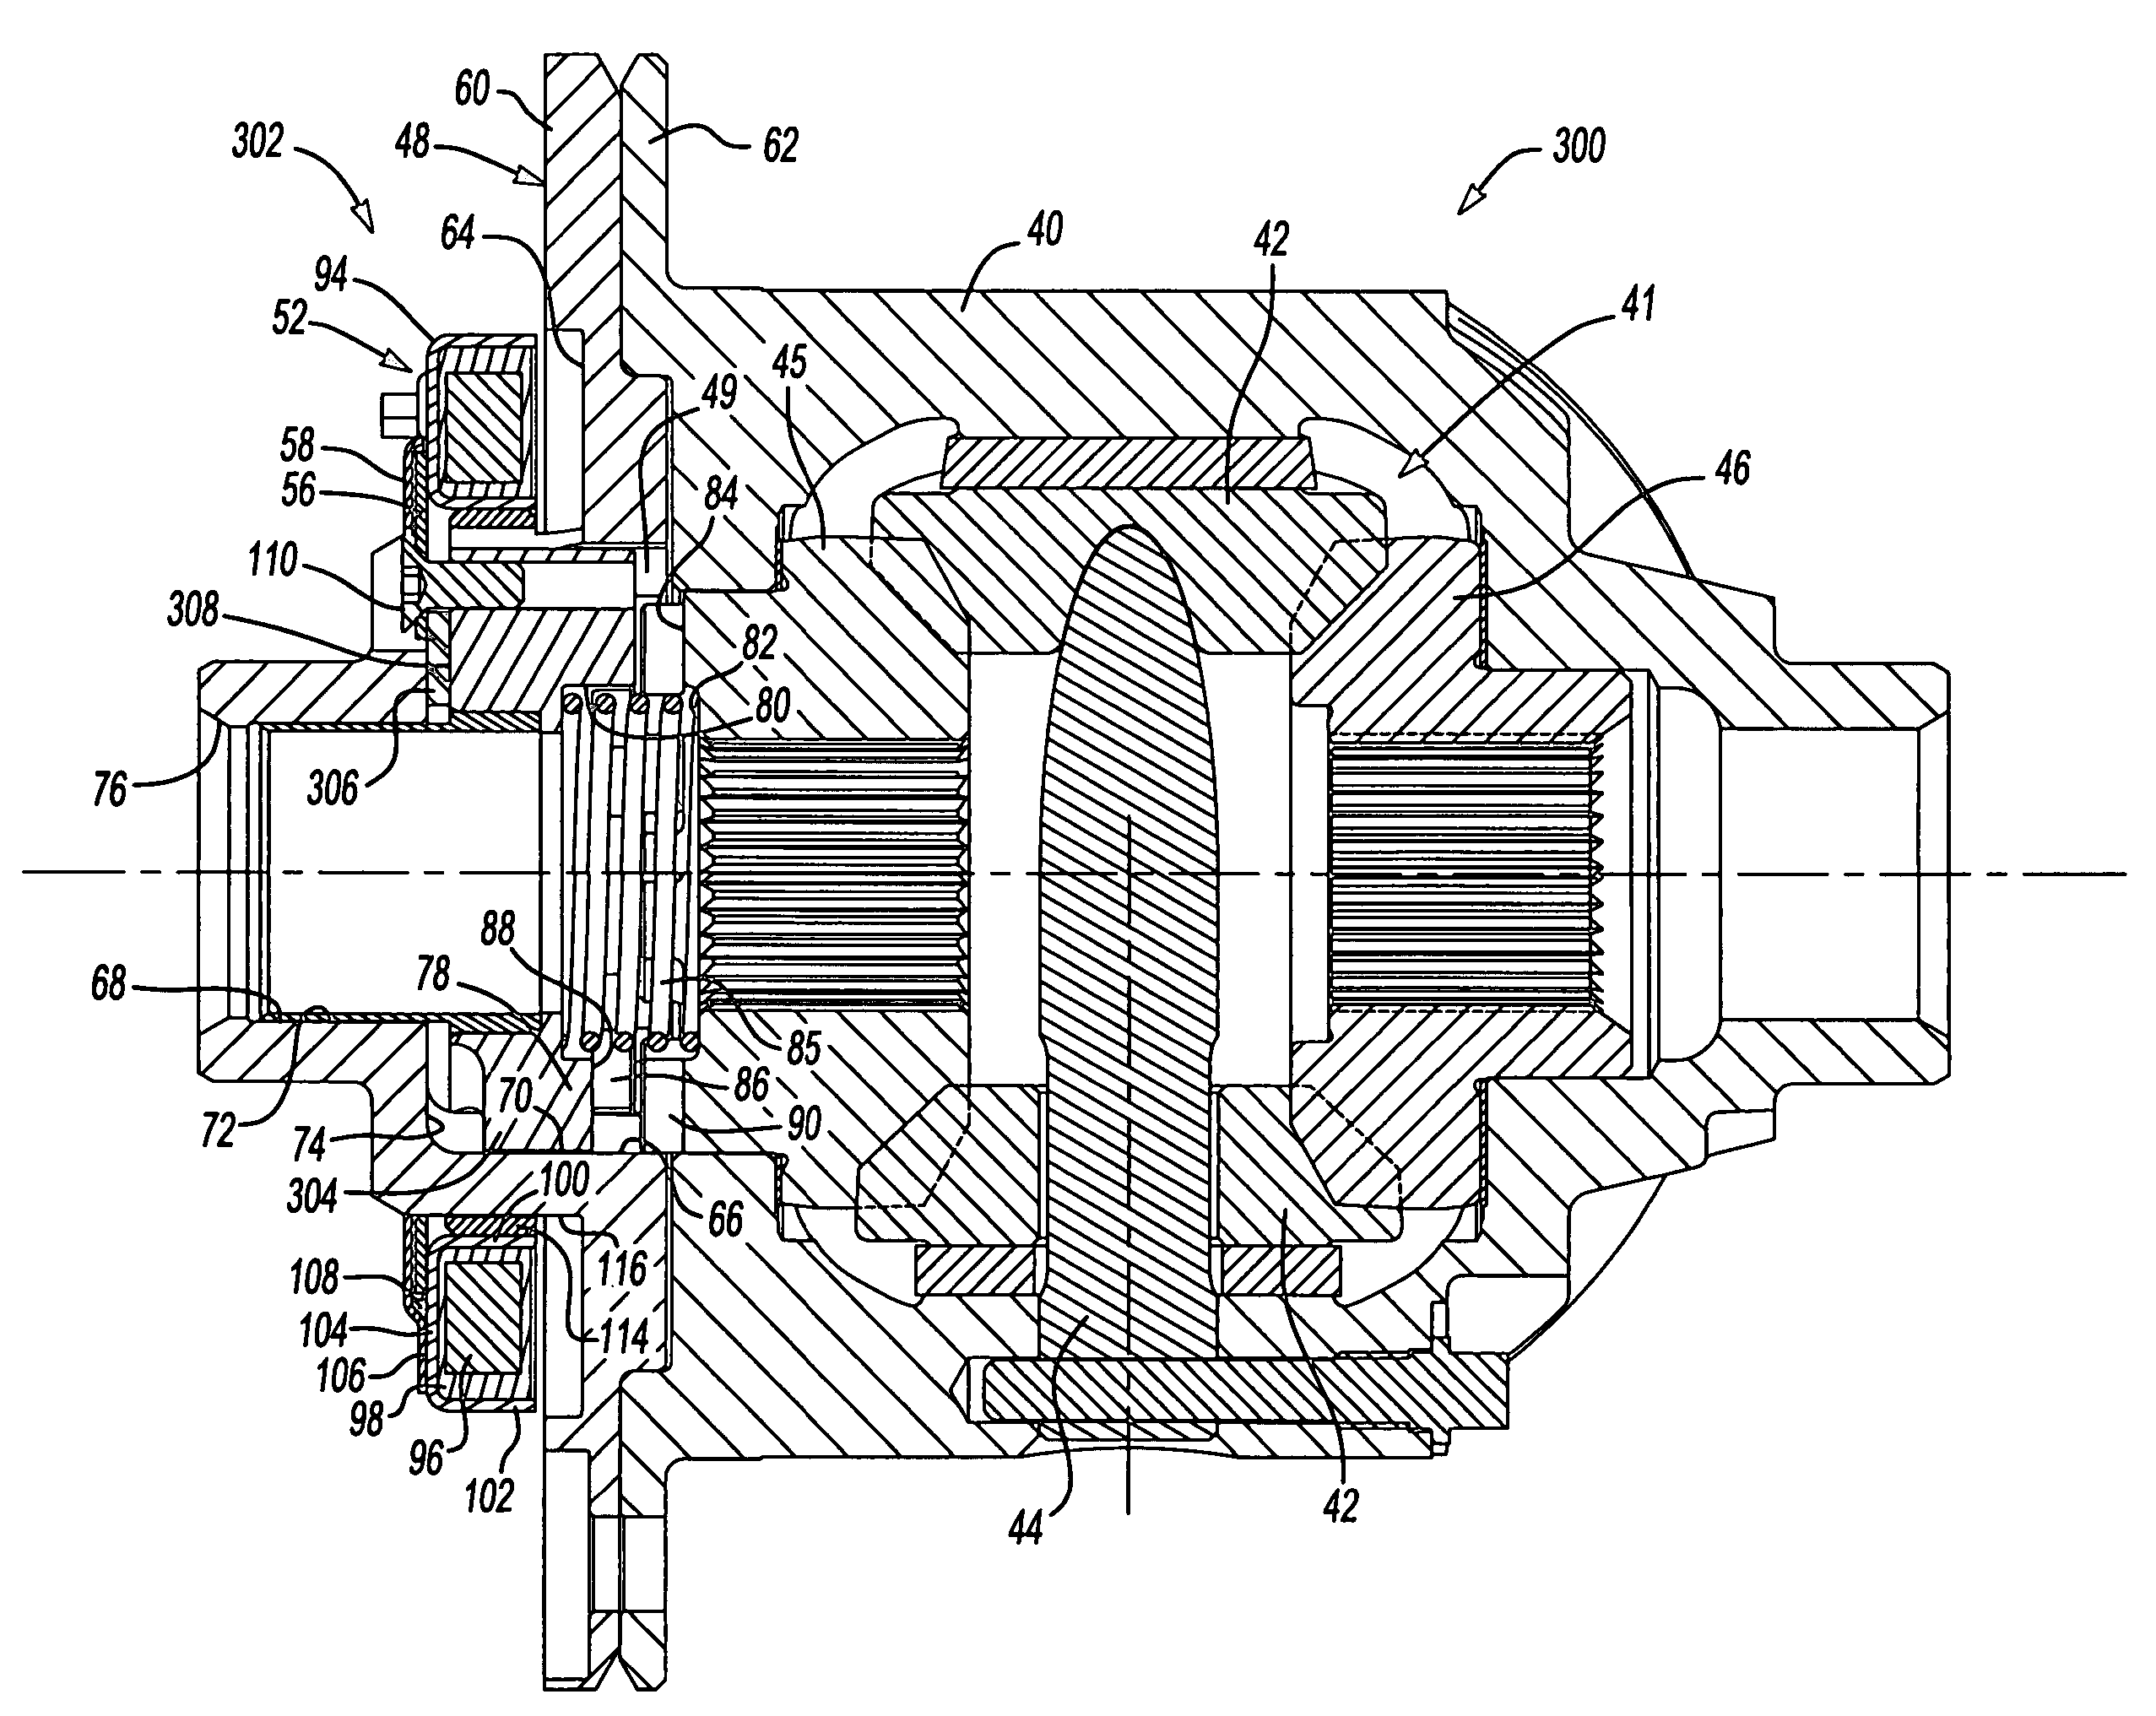 Locking differential with electromagnetic actuator